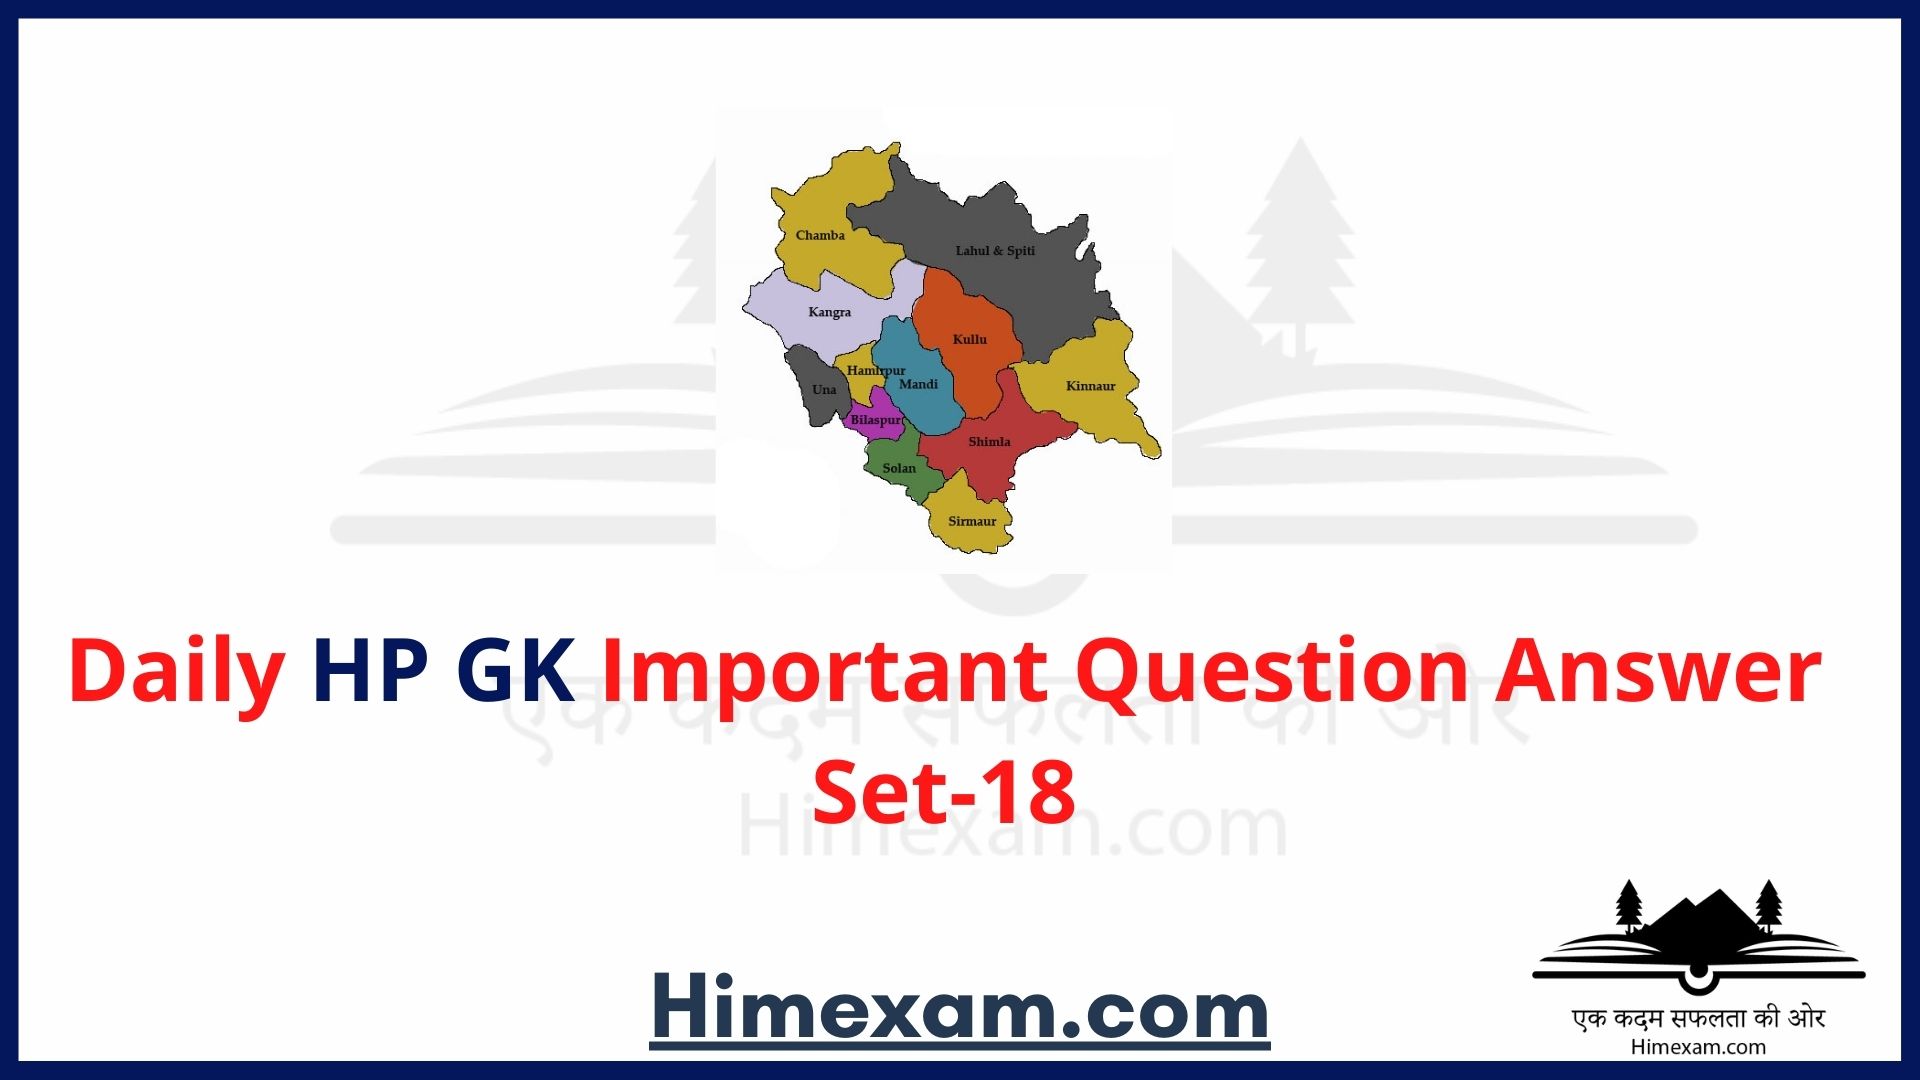 Daily HP GK Important Question Answer Set-18